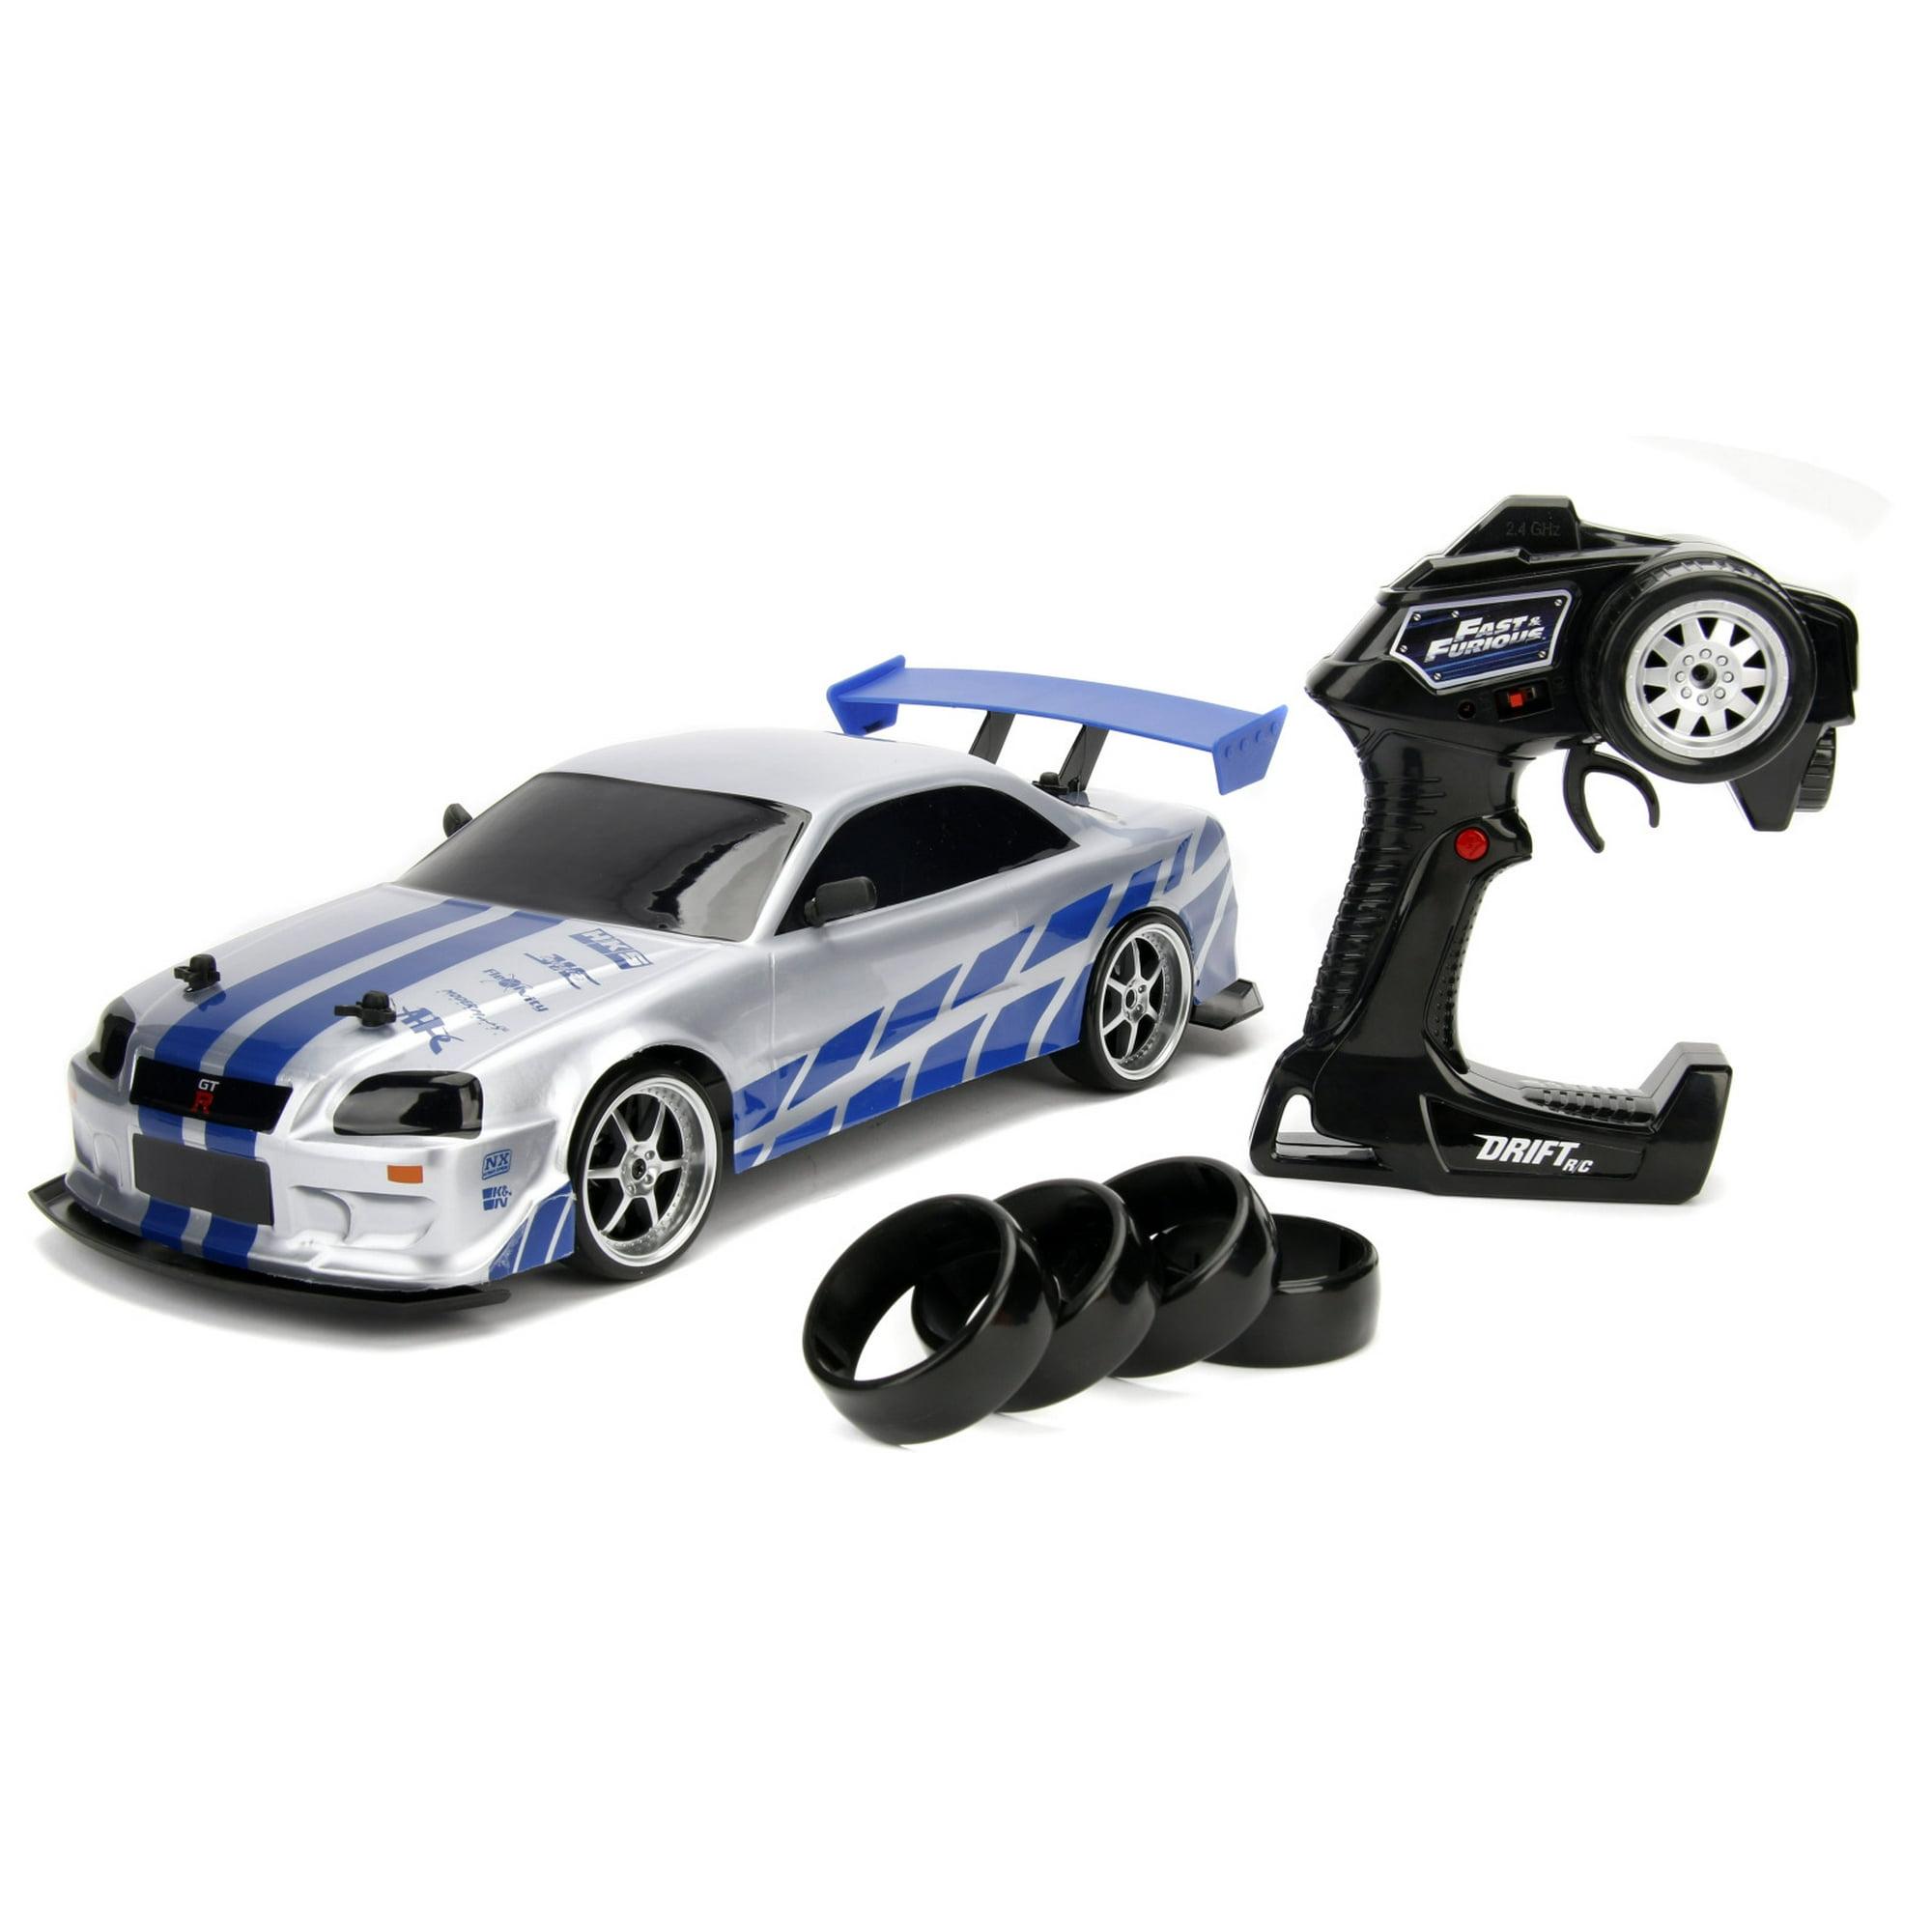 Jada Rc Fast And Furious:  Why You Need the Jada RC Fast and Furious Car for Your Collection 